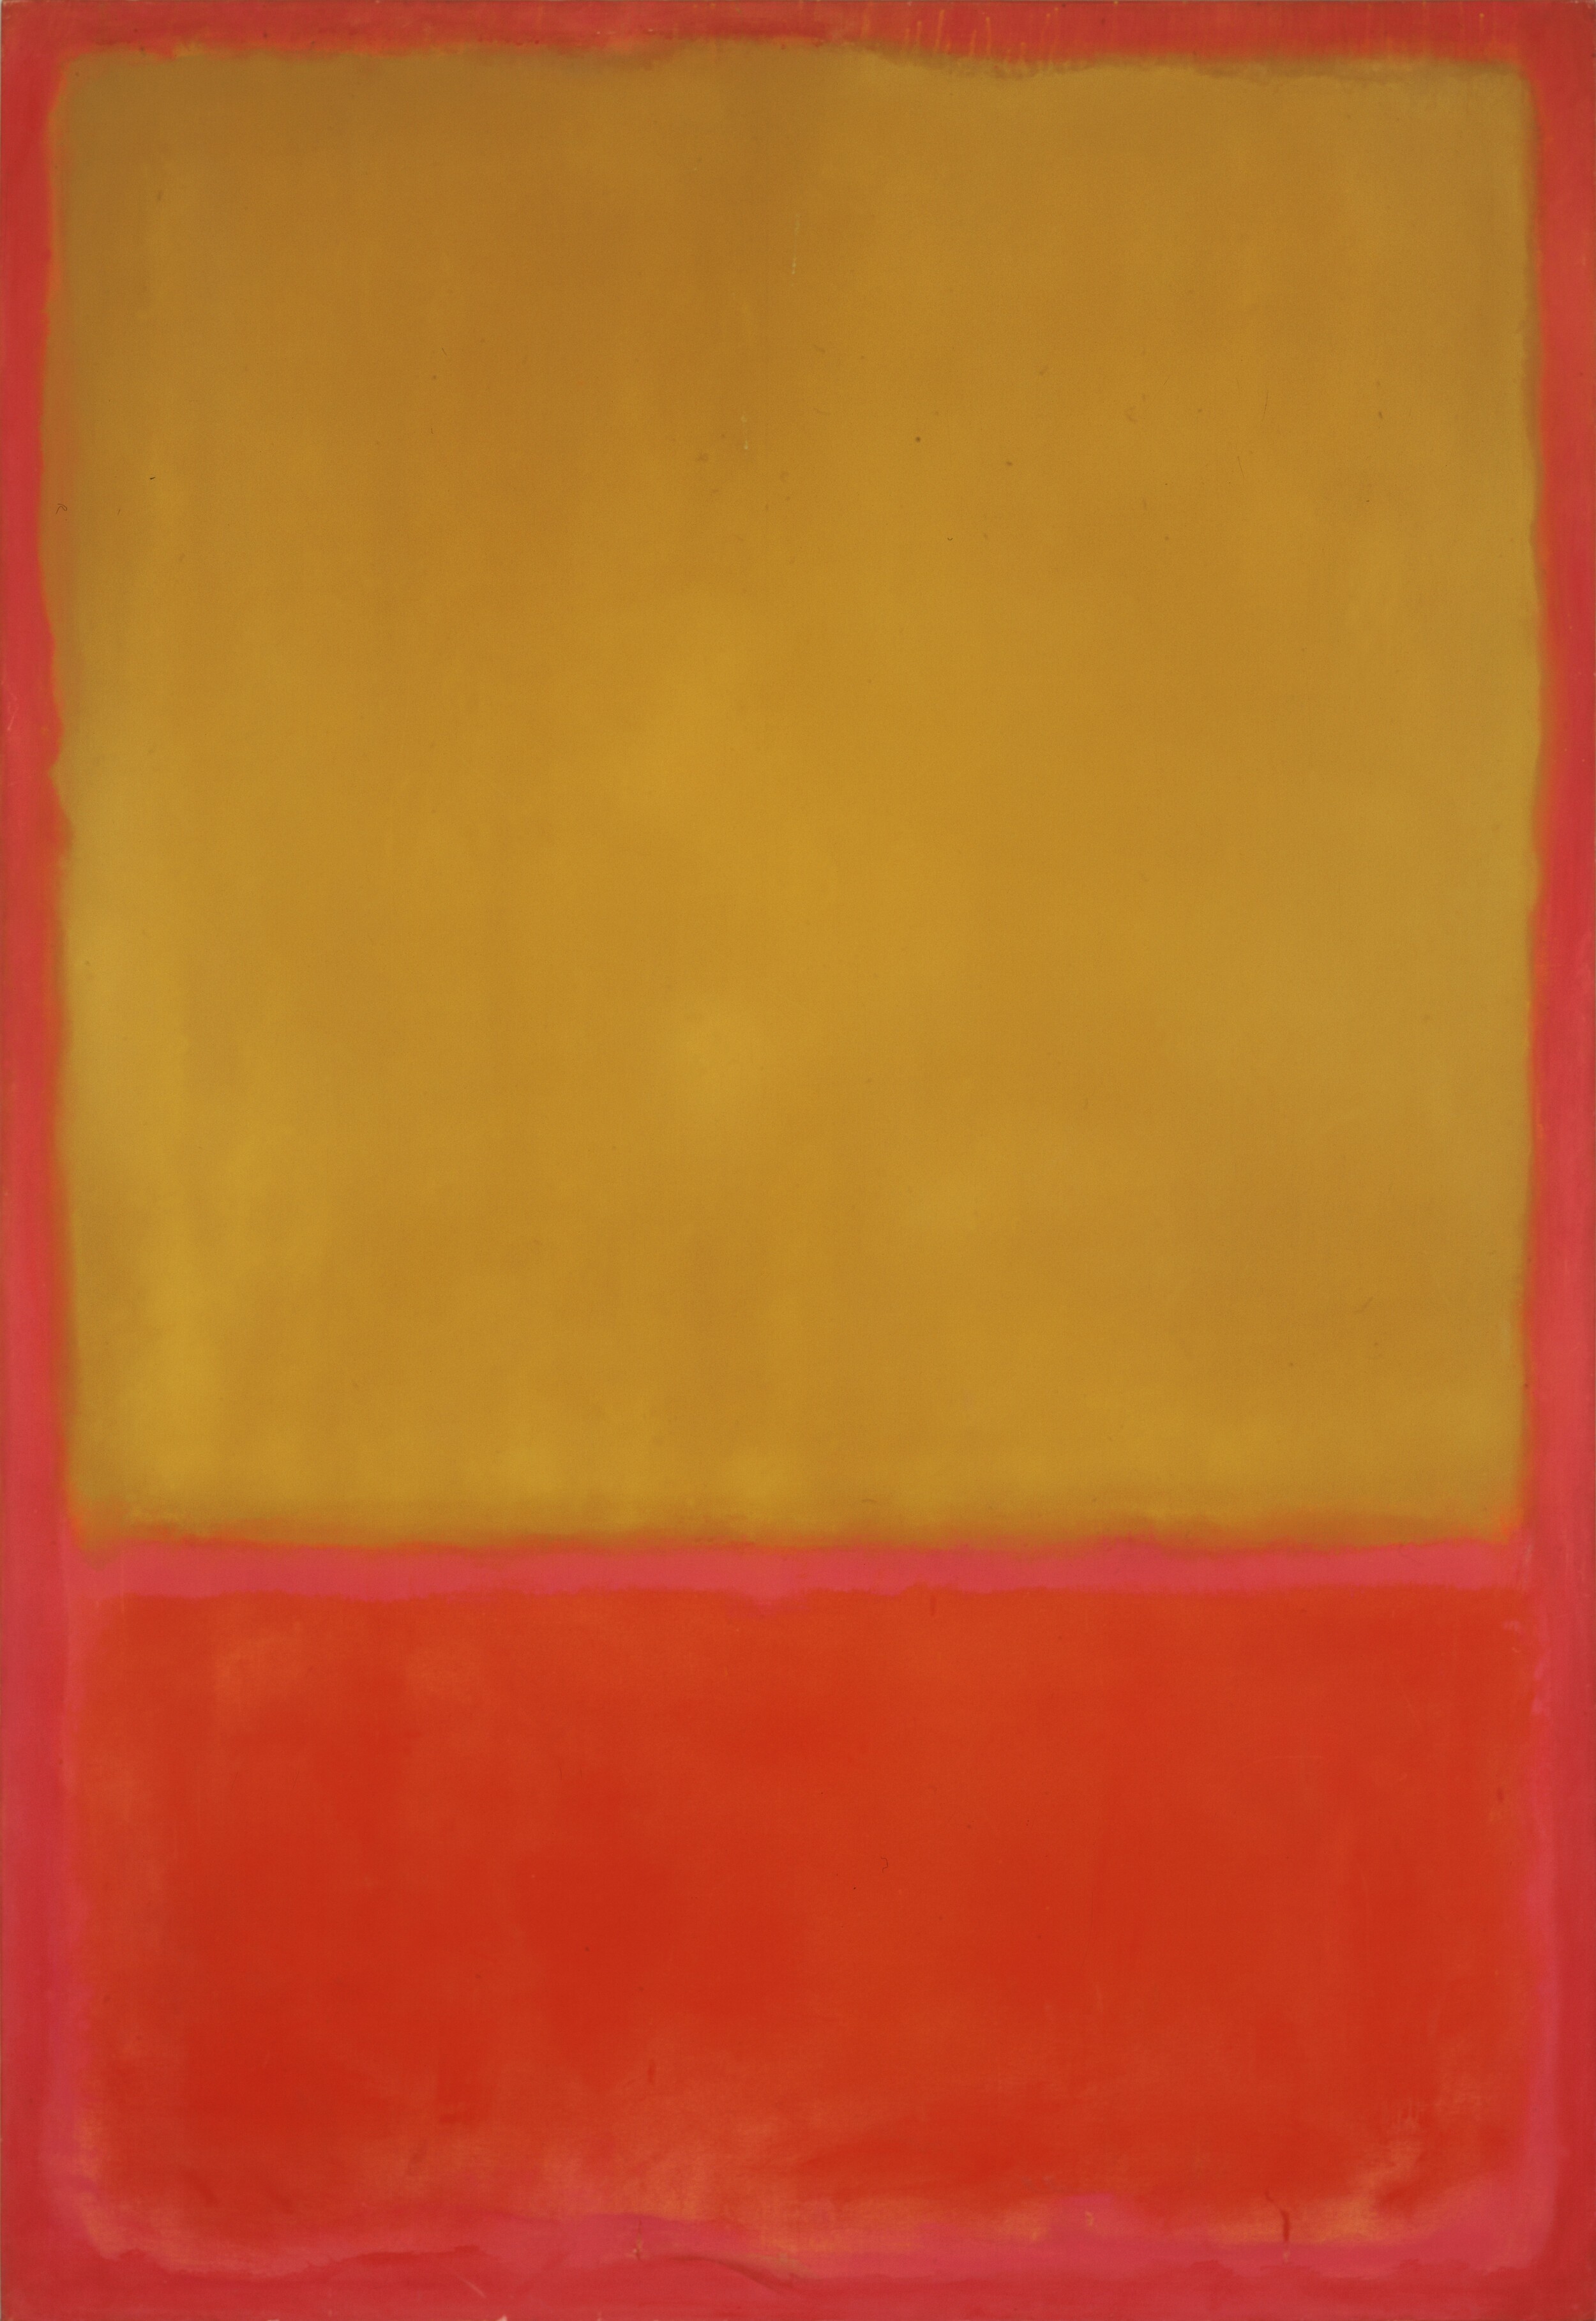 Review: A Stunning Mark Rothko Show at Paris's Fondation Louis Vuitton –